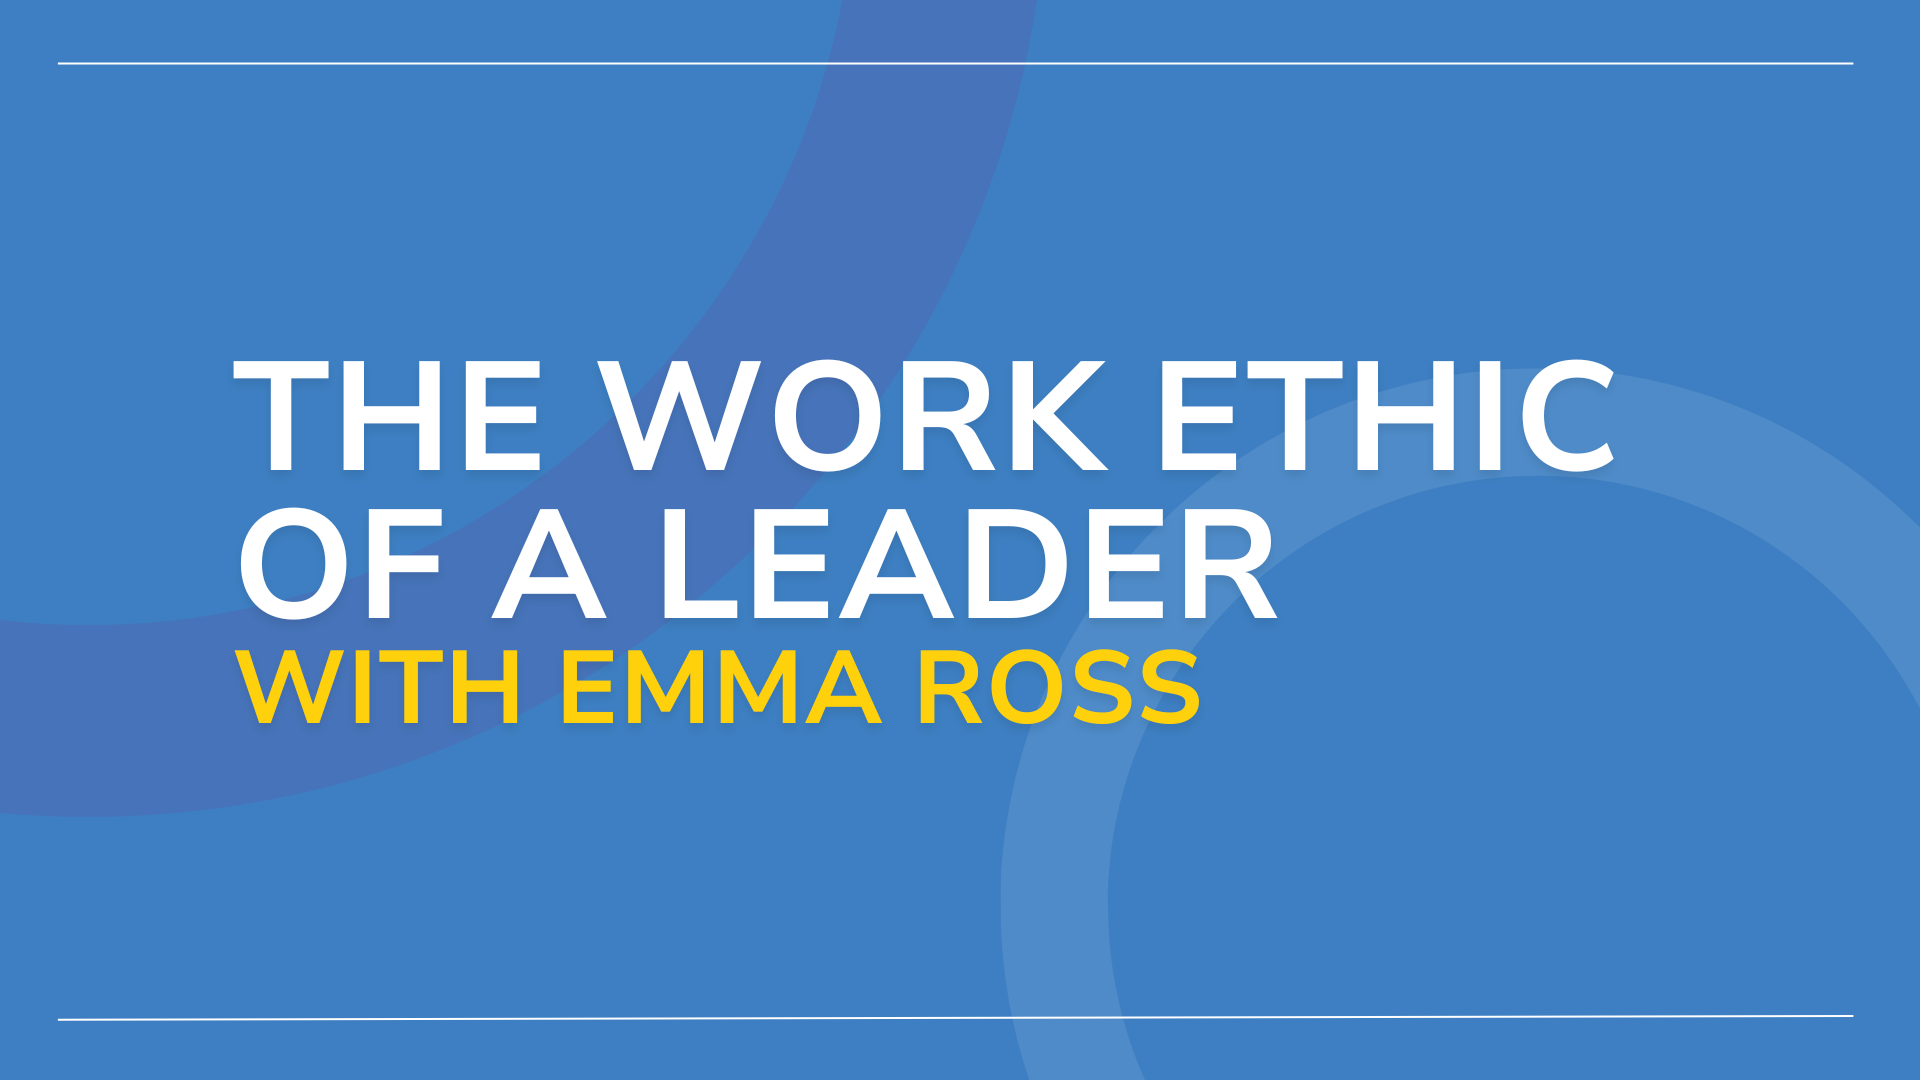 The Work Ethic of a Leader with Emma Ross